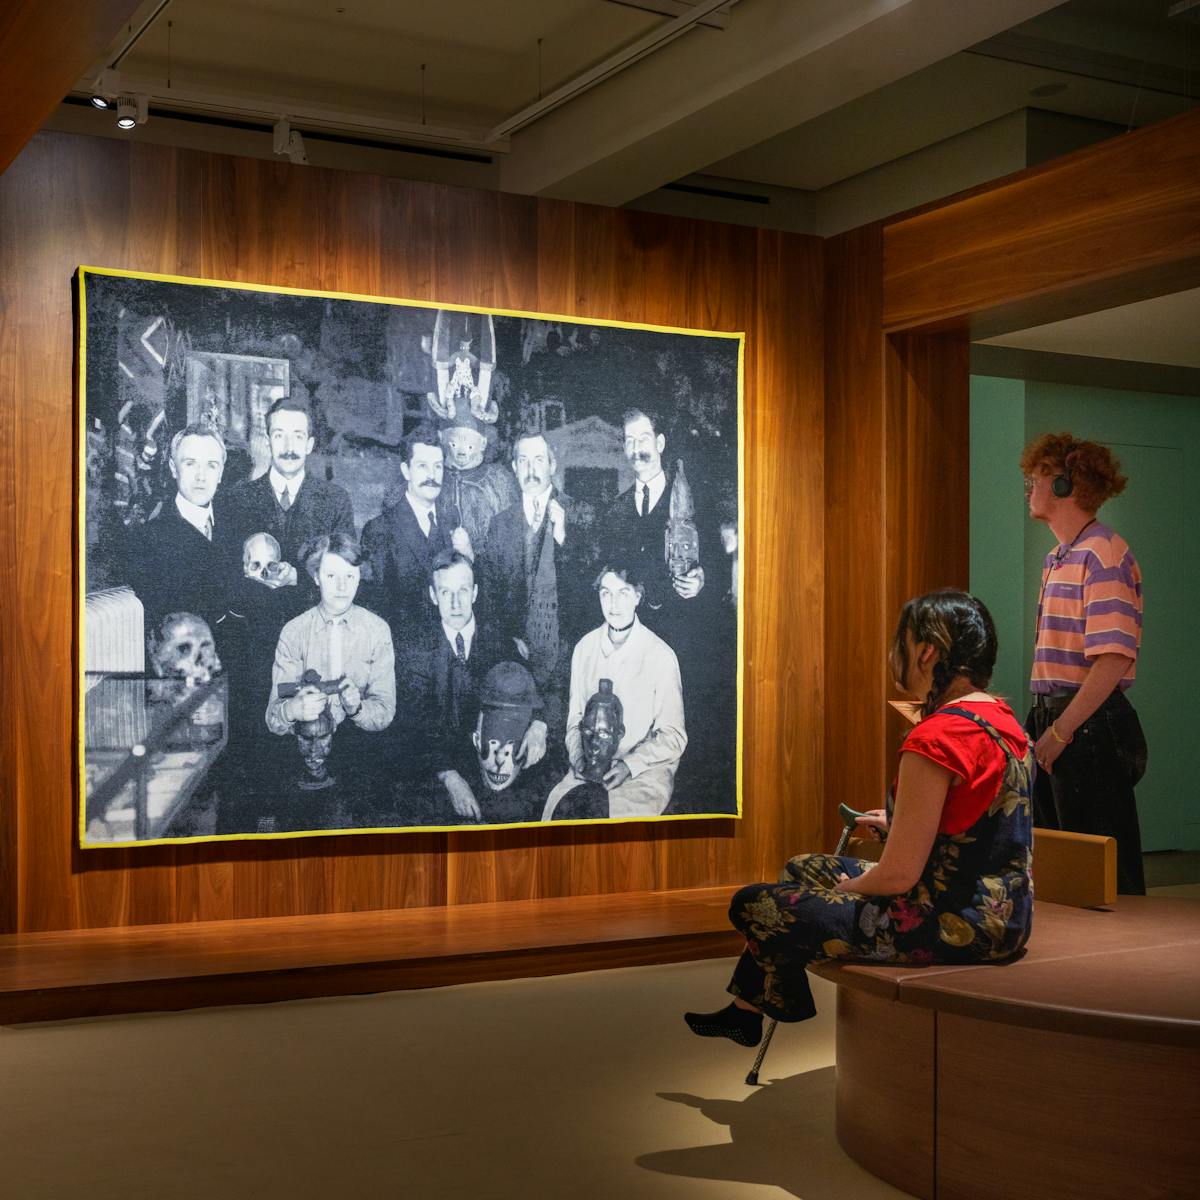 Photograph of a gallery exhibition space showing large tapestry hung on a wooden wall. The tapestry is made up of a black and white, archive photograph, from the early 20th century showing a group of white men and women gathered in a group holding museum artefacts in their hands or on their laps. They are surrounded by other museum exhibits and display cases. The tapestry is framed with a bright yellow border. Surrounding the tapestry is a wider wooden structure containing seating and alcoves. To the right of the image a gallery visitor reclines in one of the alcoves with her back to the tapestry, in contemplation. To the right two more visitors, one sitting, one standing are looking at the tapestry. The standing visitor is listening to an audio guide on headphones. The hues of the scene are warm browns and olive greens.